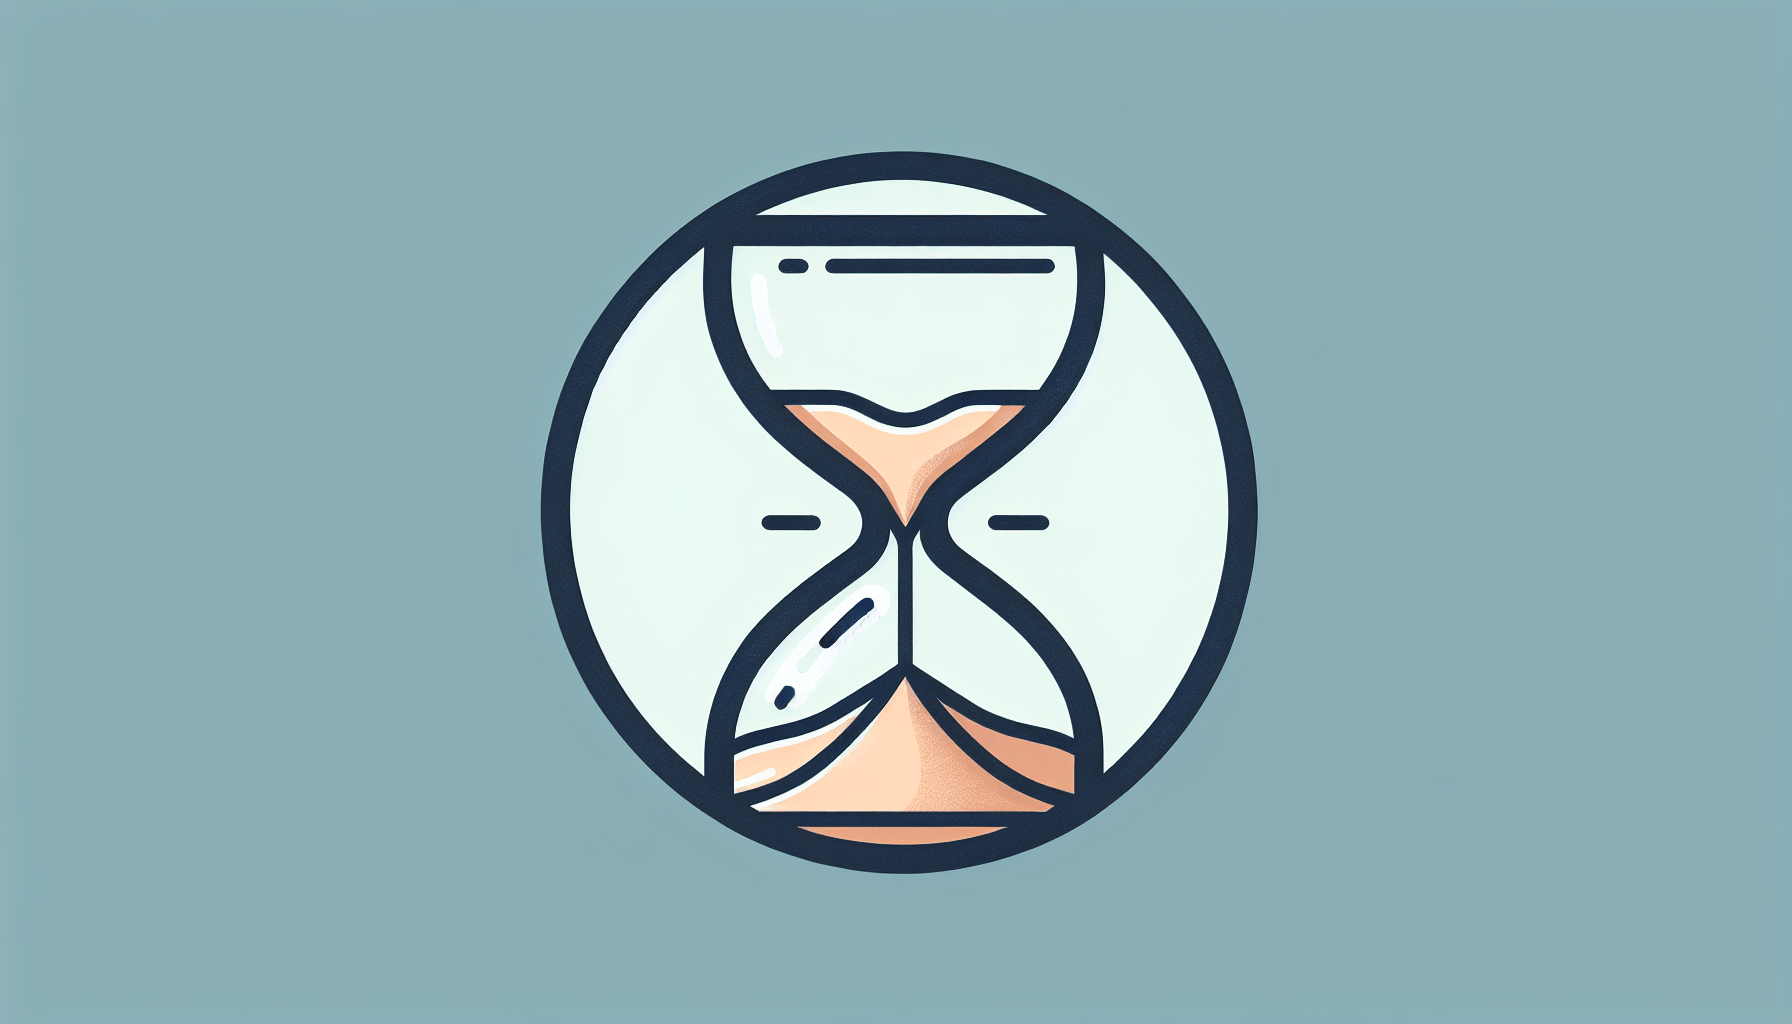 Hourglass in flat illustration style